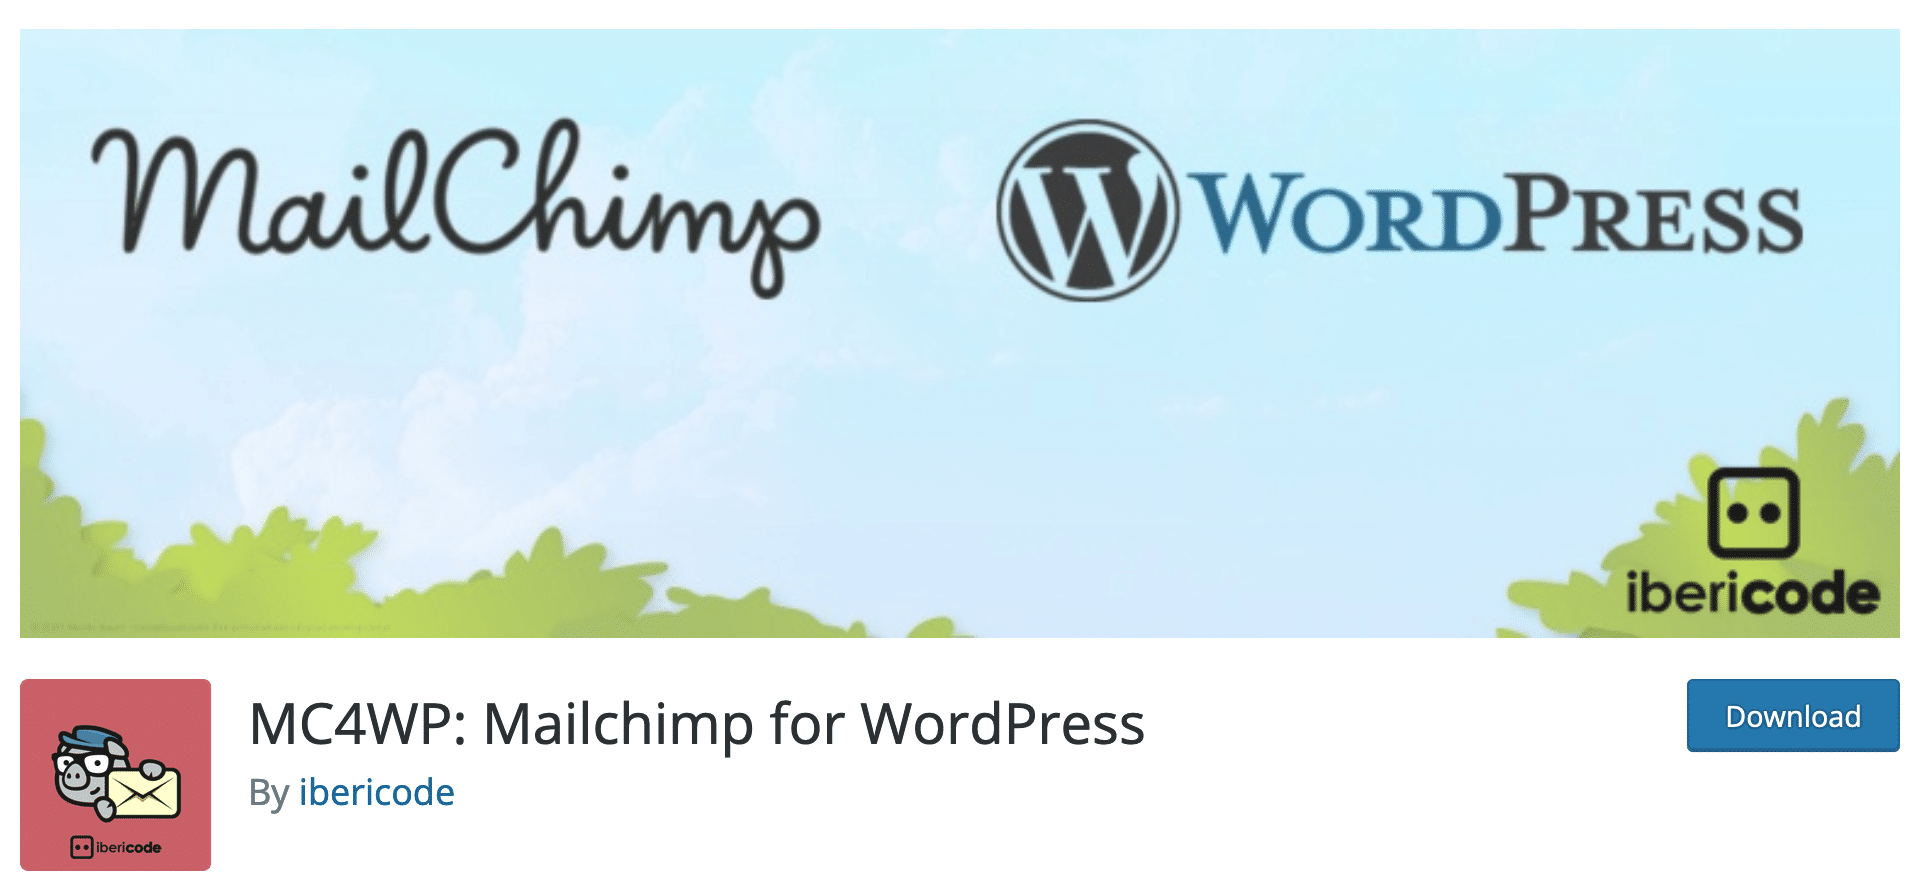 The Mailchimp for WordPress (MC4WP) plugin to download on the official WordPress directory.